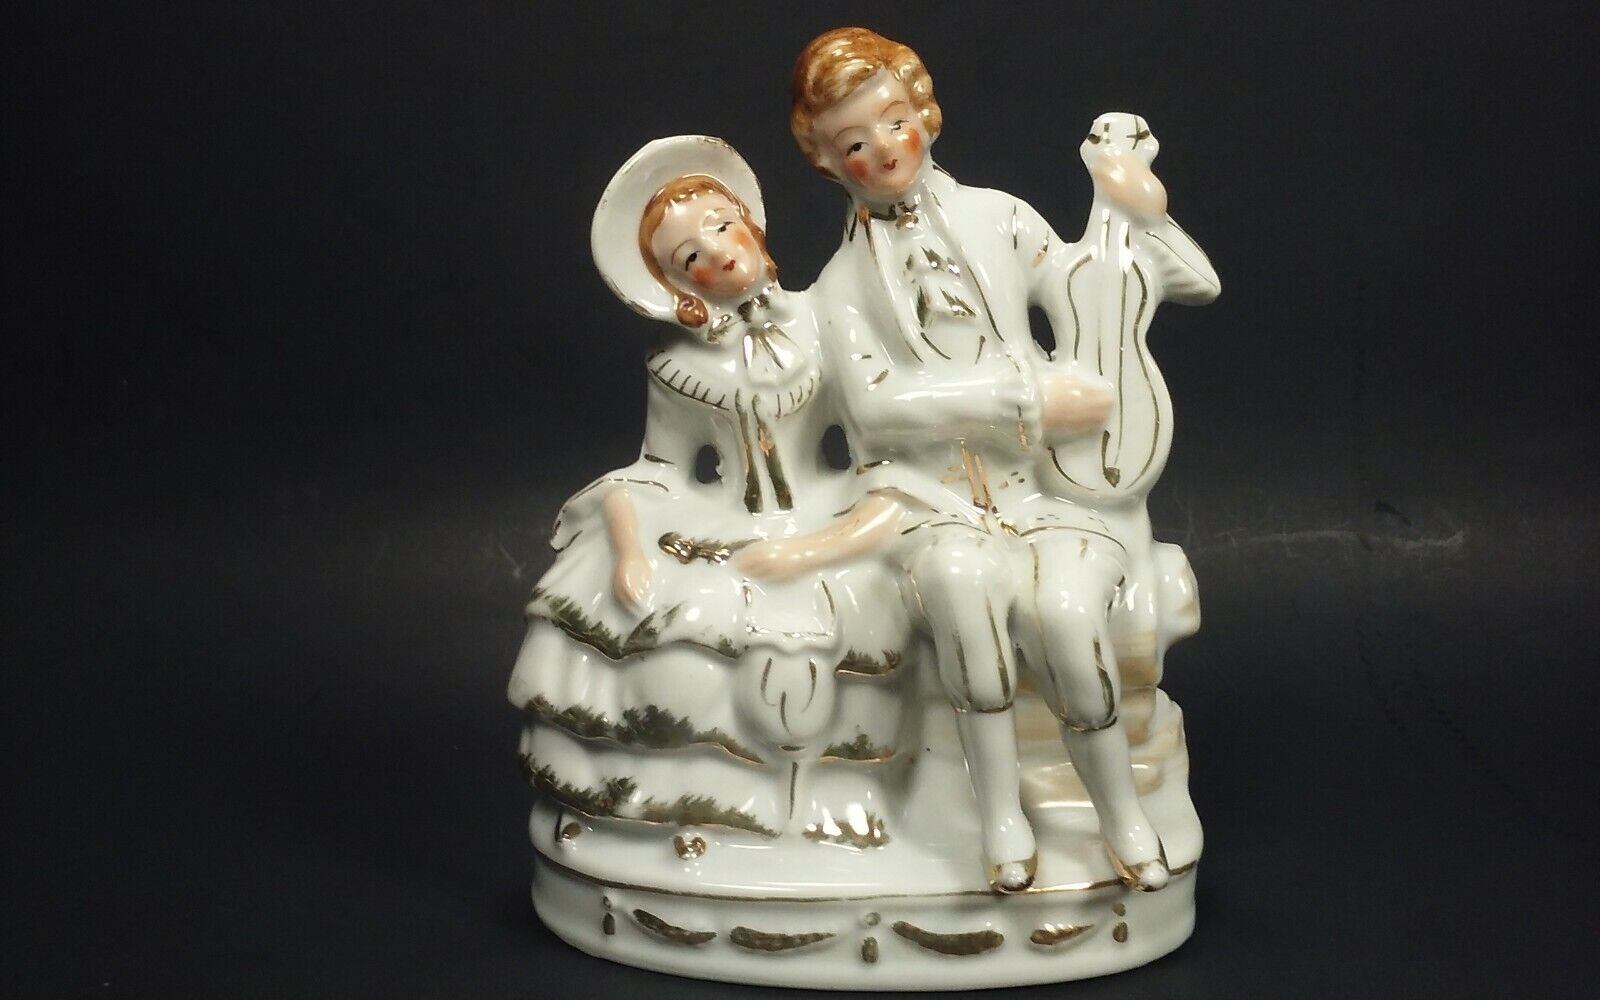 30\'s, Courting Victorian Woman and Man figurine playing violin